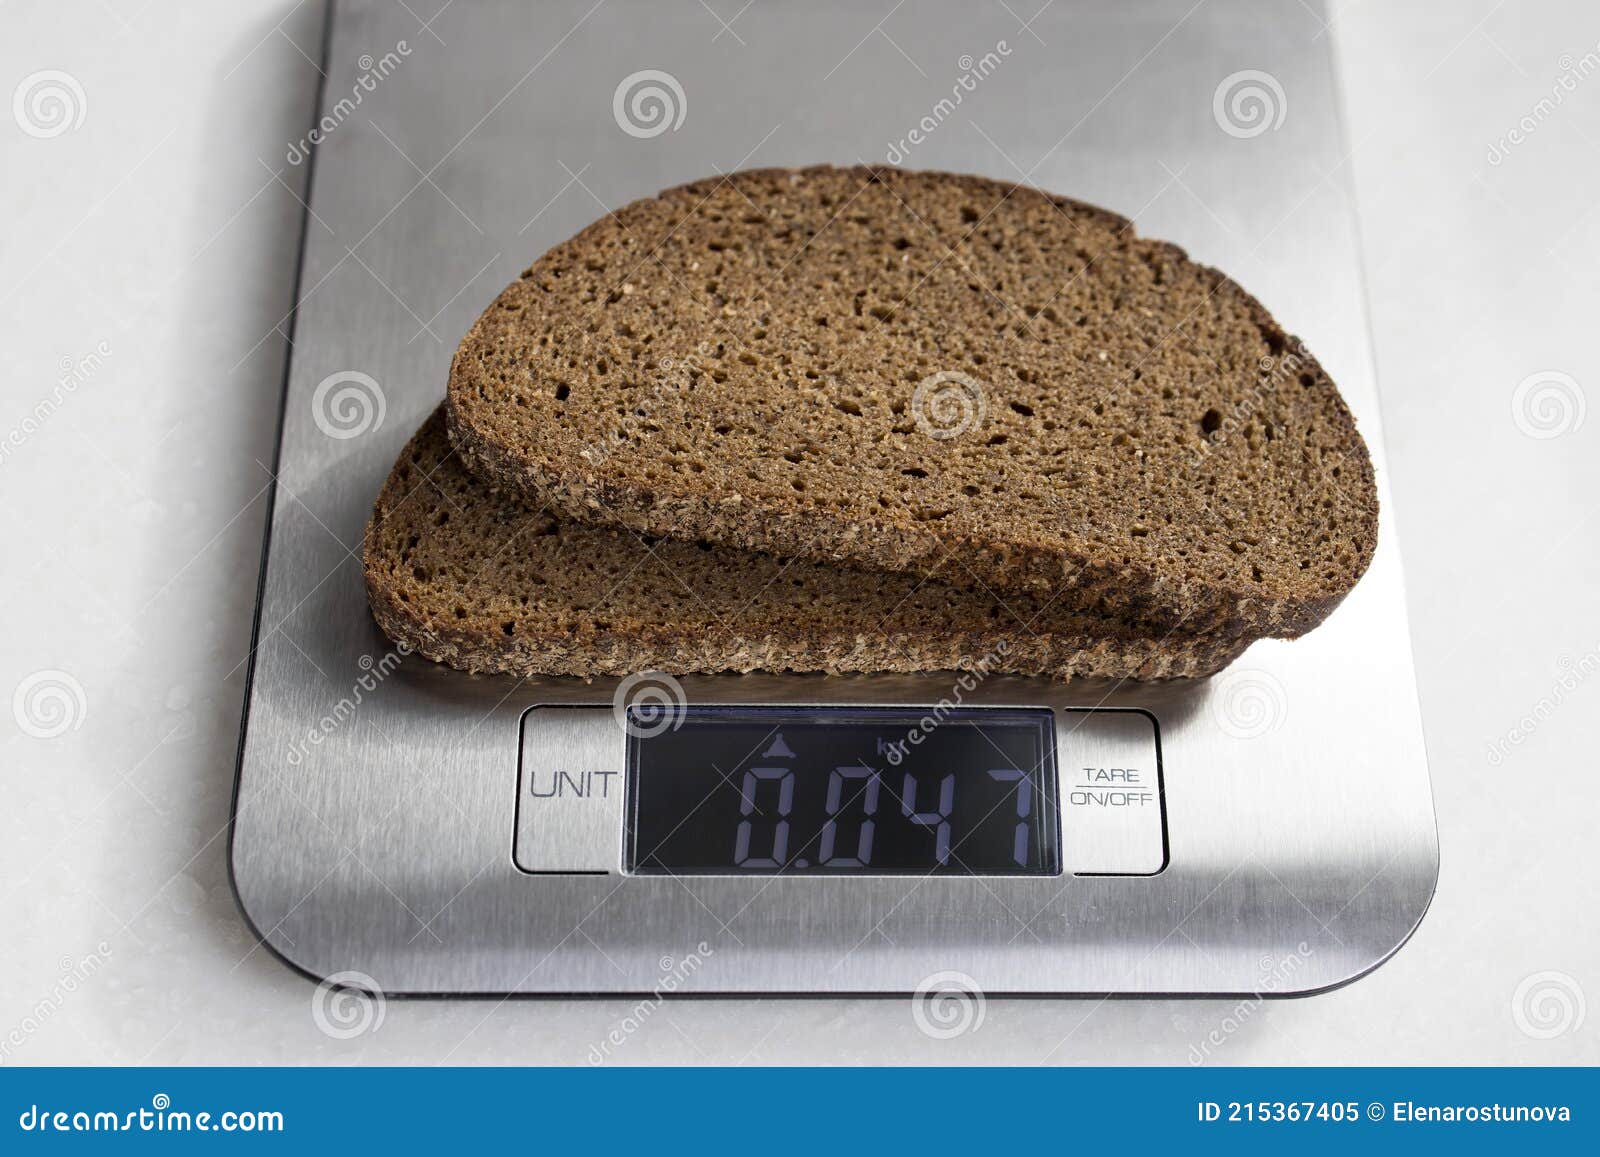 https://thumbs.dreamstime.com/z/two-pieces-rye-bread-weighed-kitchen-scale-diet-215367405.jpg